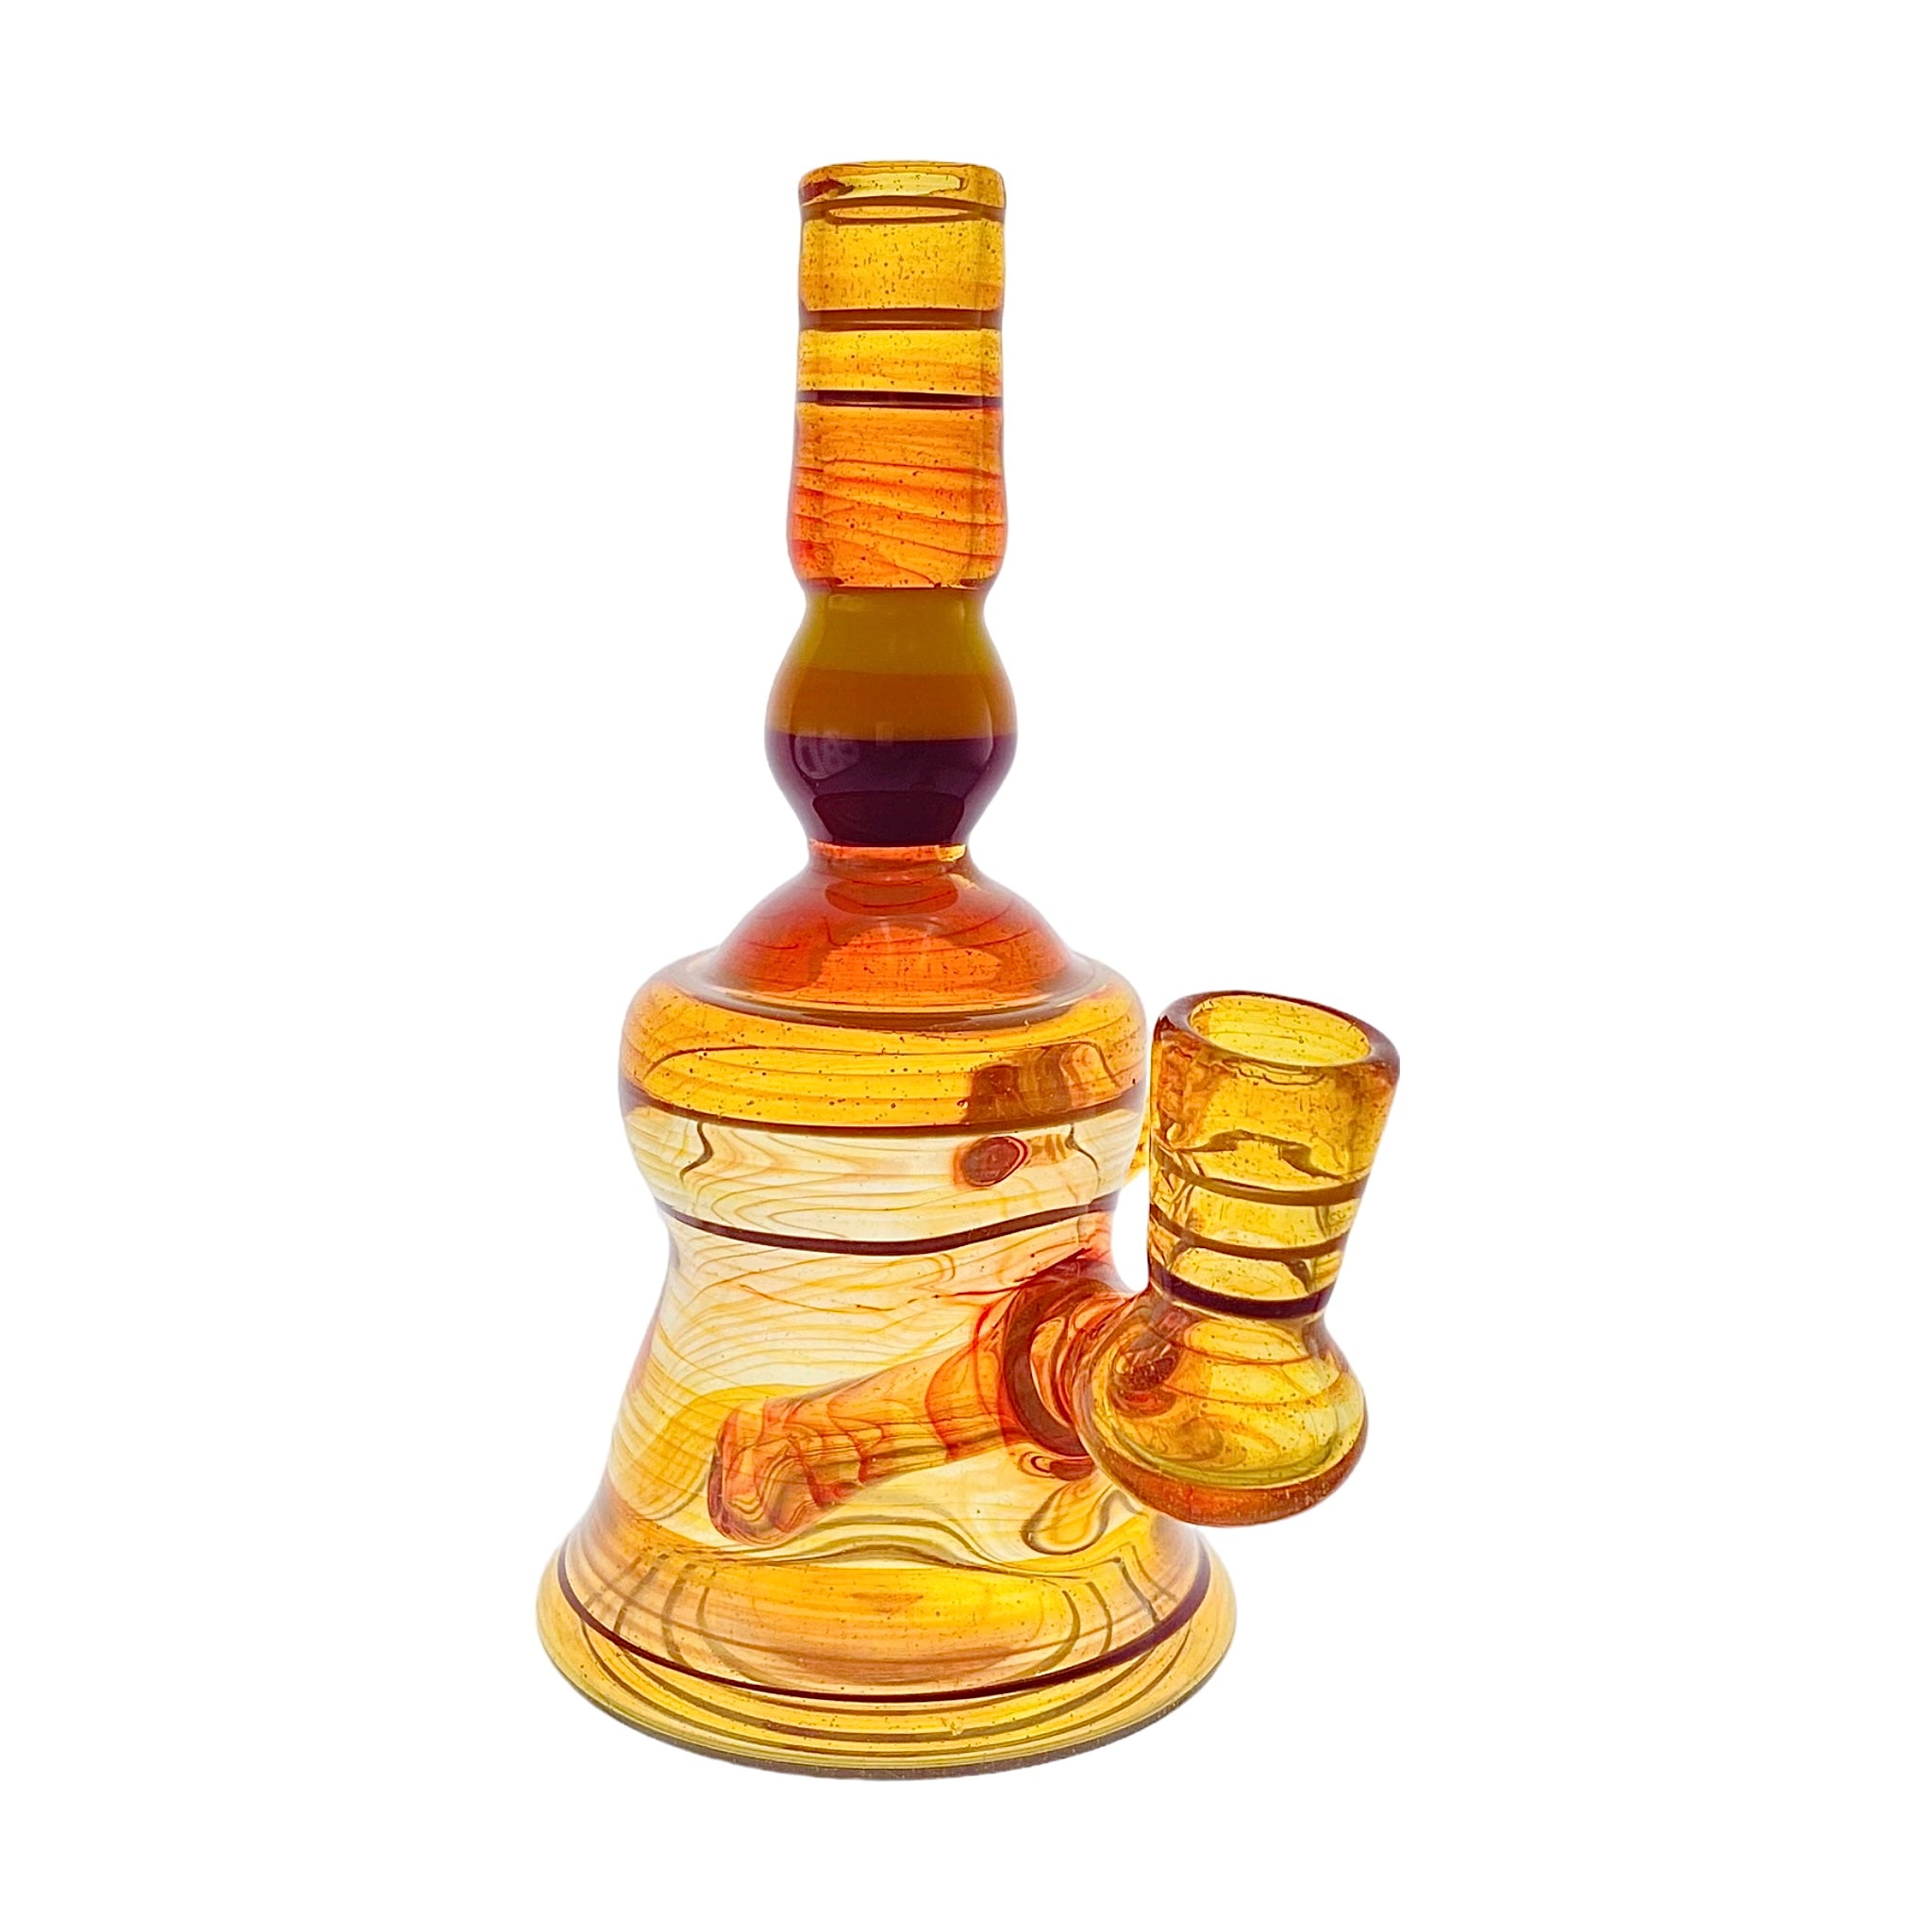 Collin Kennedy Glass - Translucent Amber Glass Dab Rig With Yellow, Orange, Red Linework